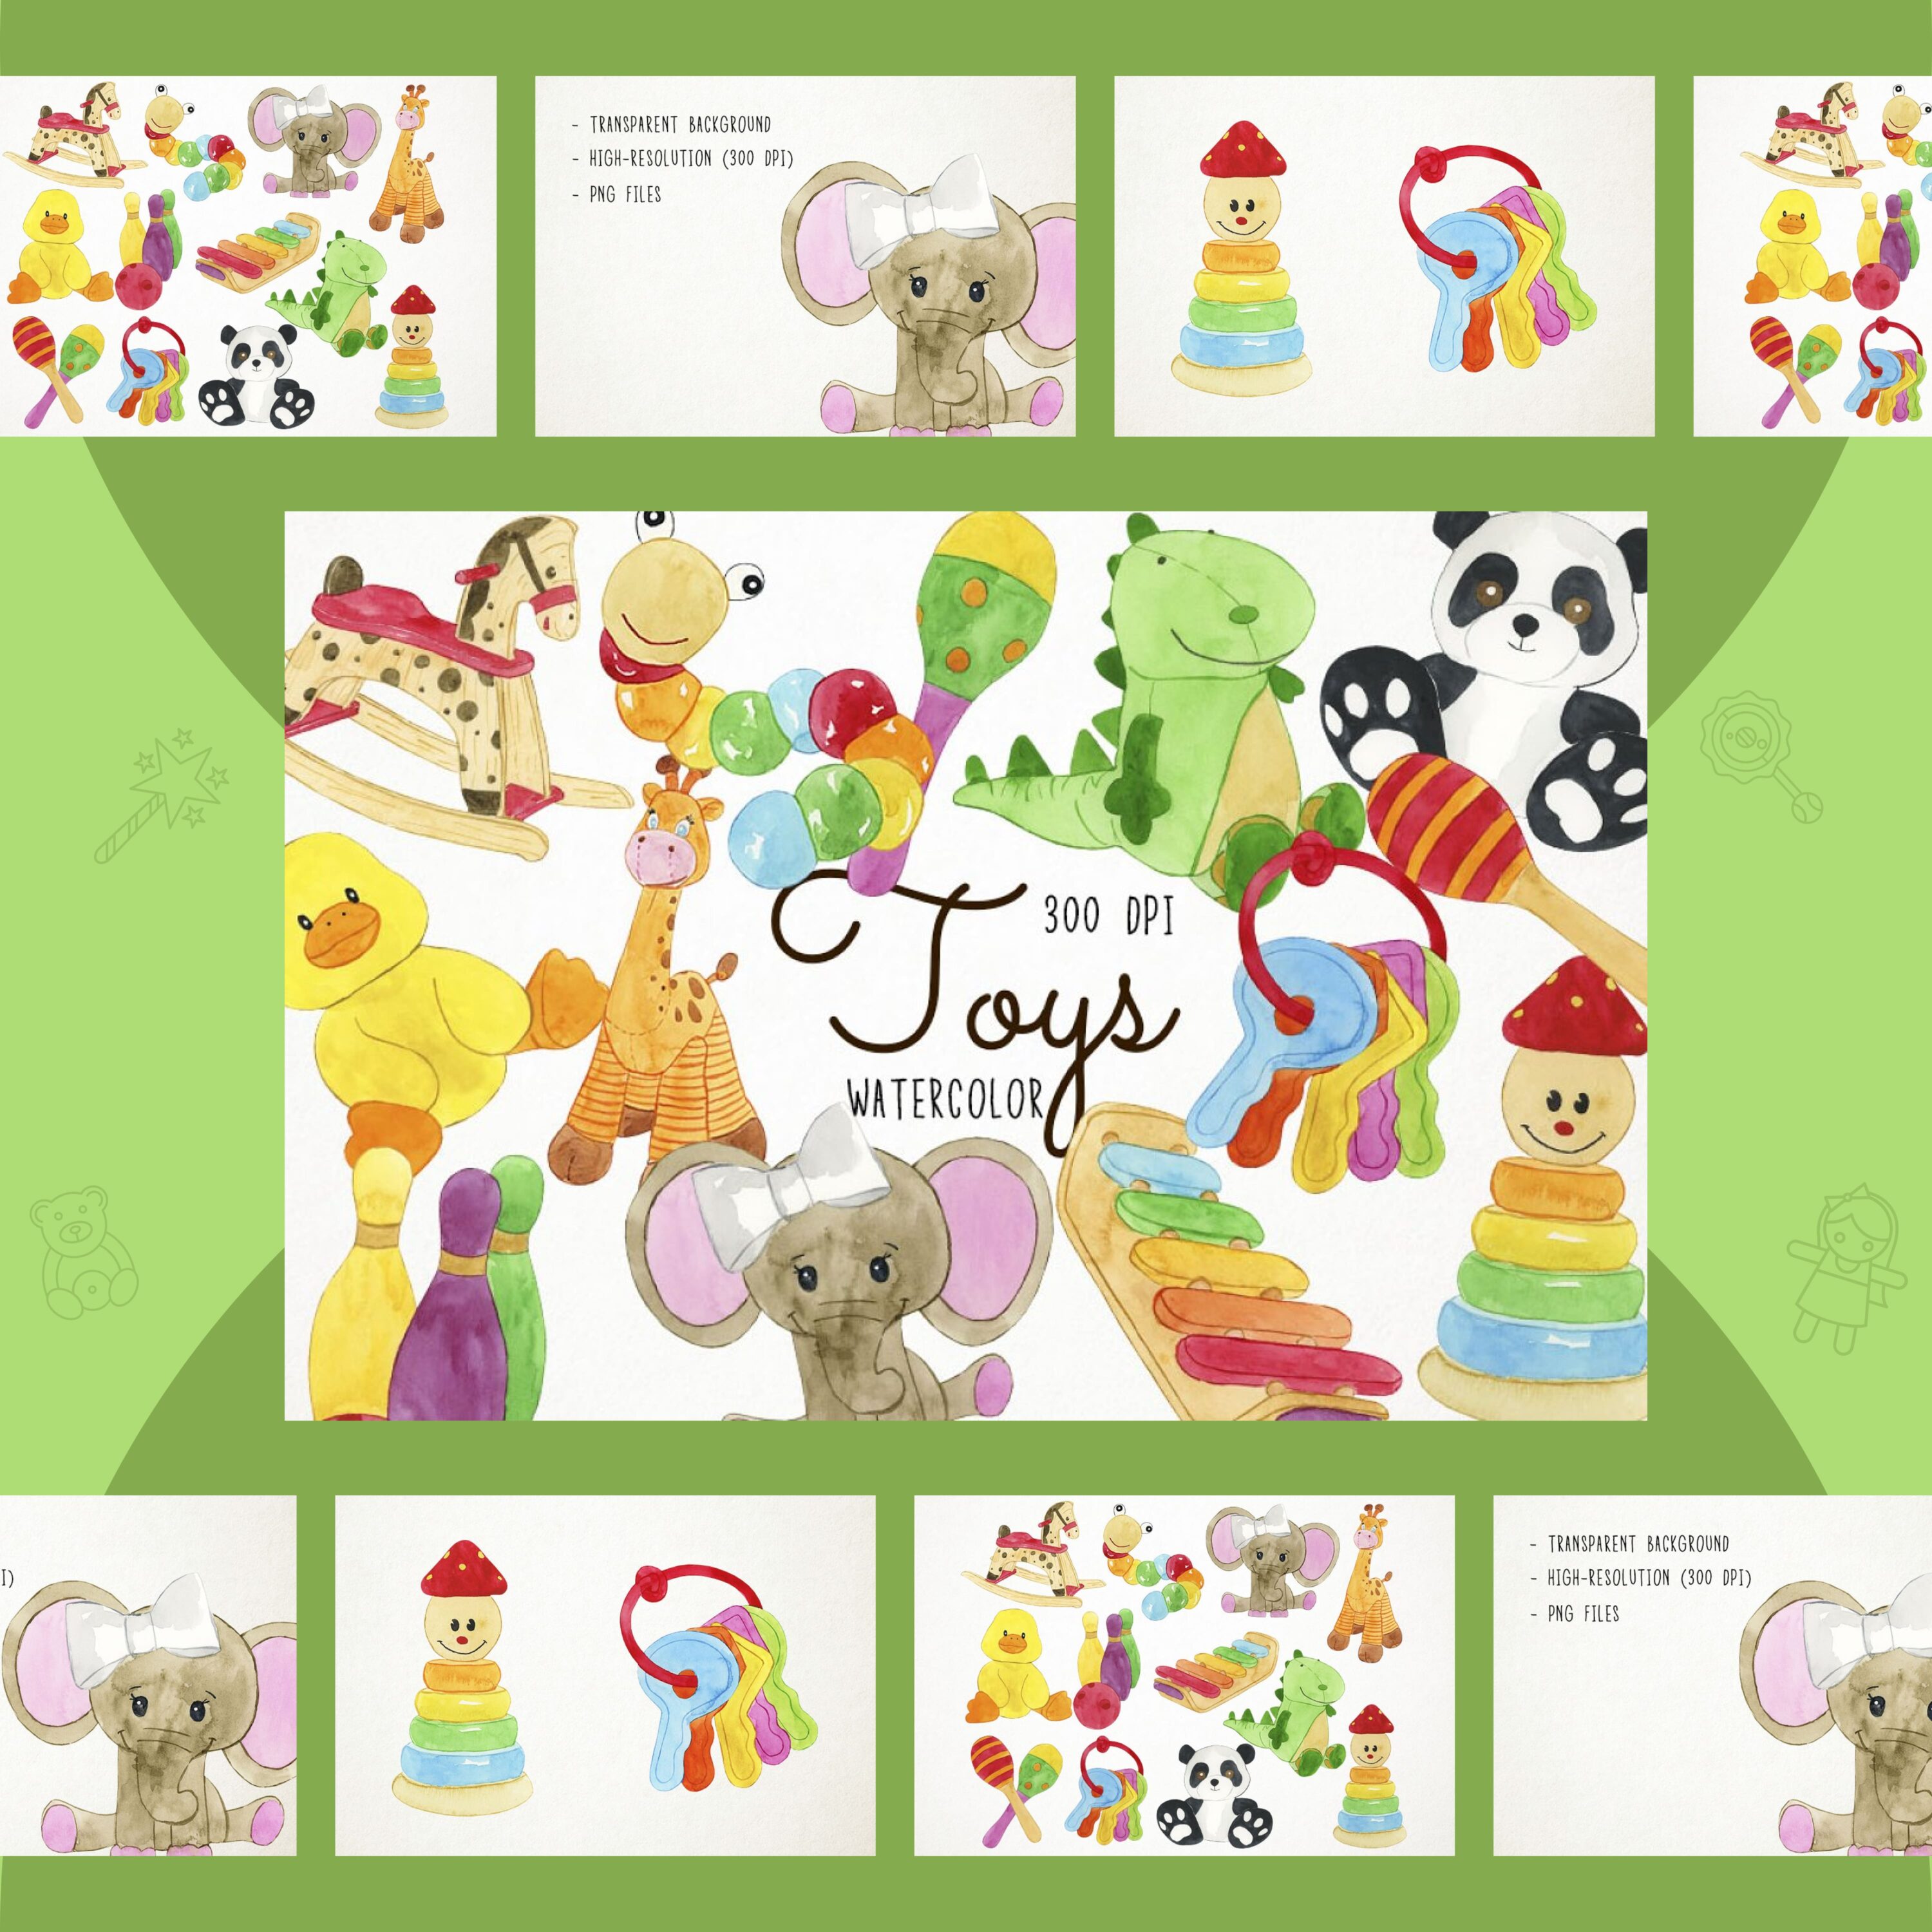 Watercolor Toys Clipart cover.